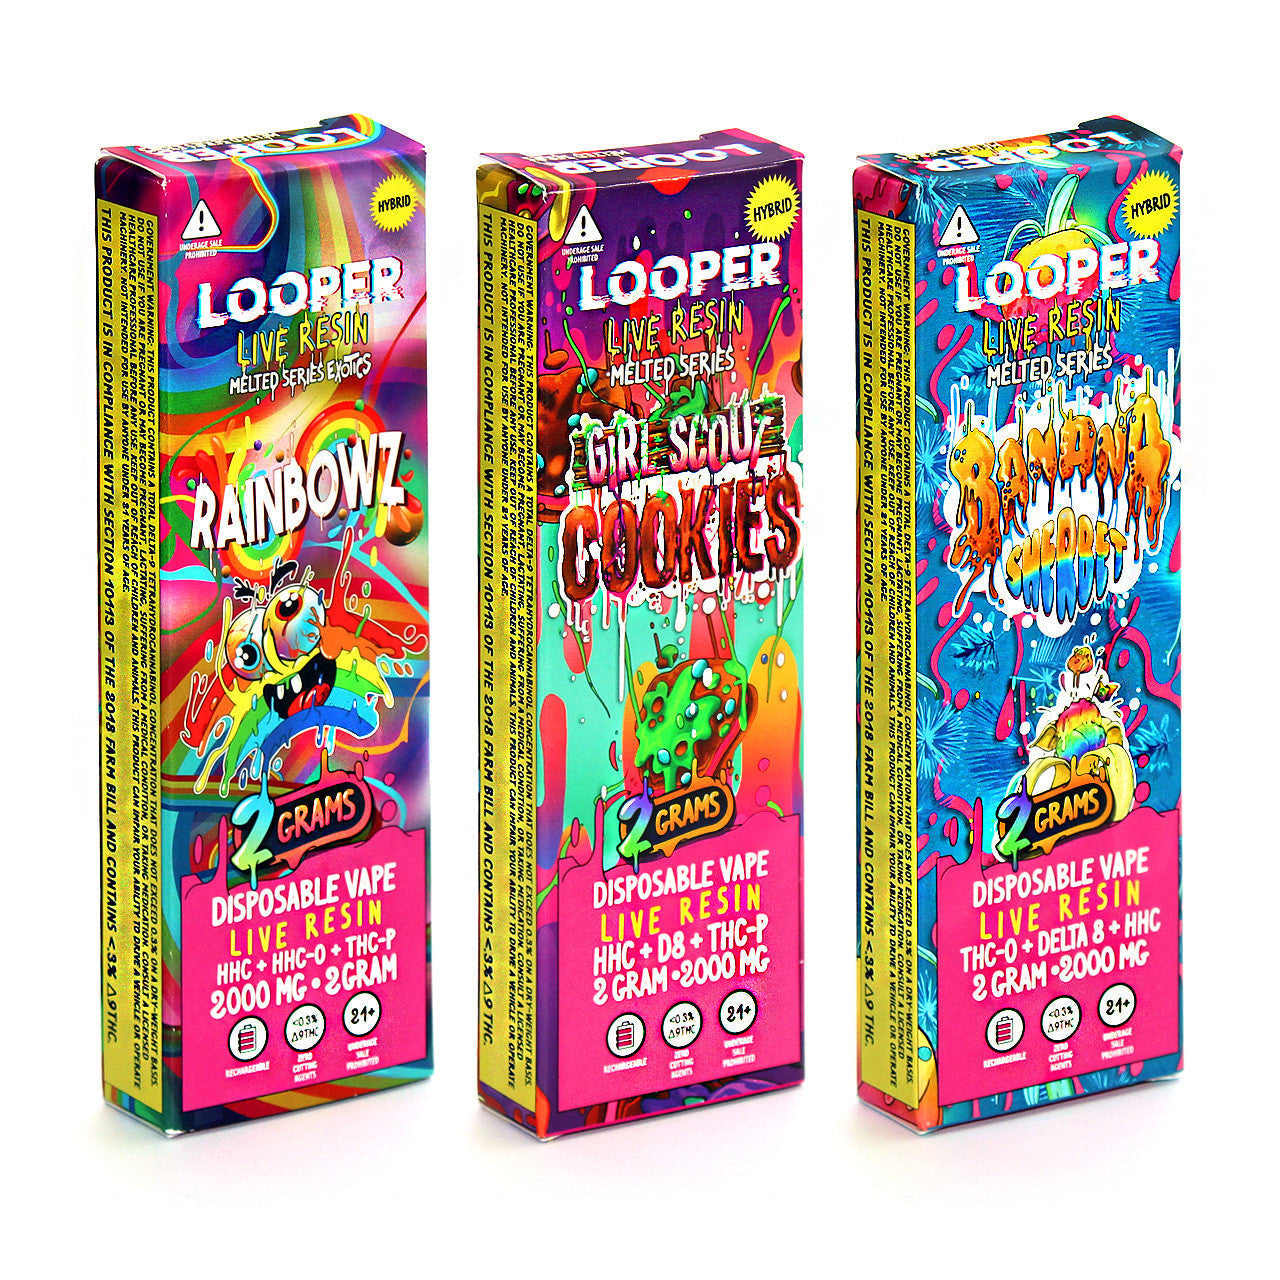 Wholesale Looper Melted Series Live Resin Disposable Vape 2000mg 02 Gram - Pack Of 10